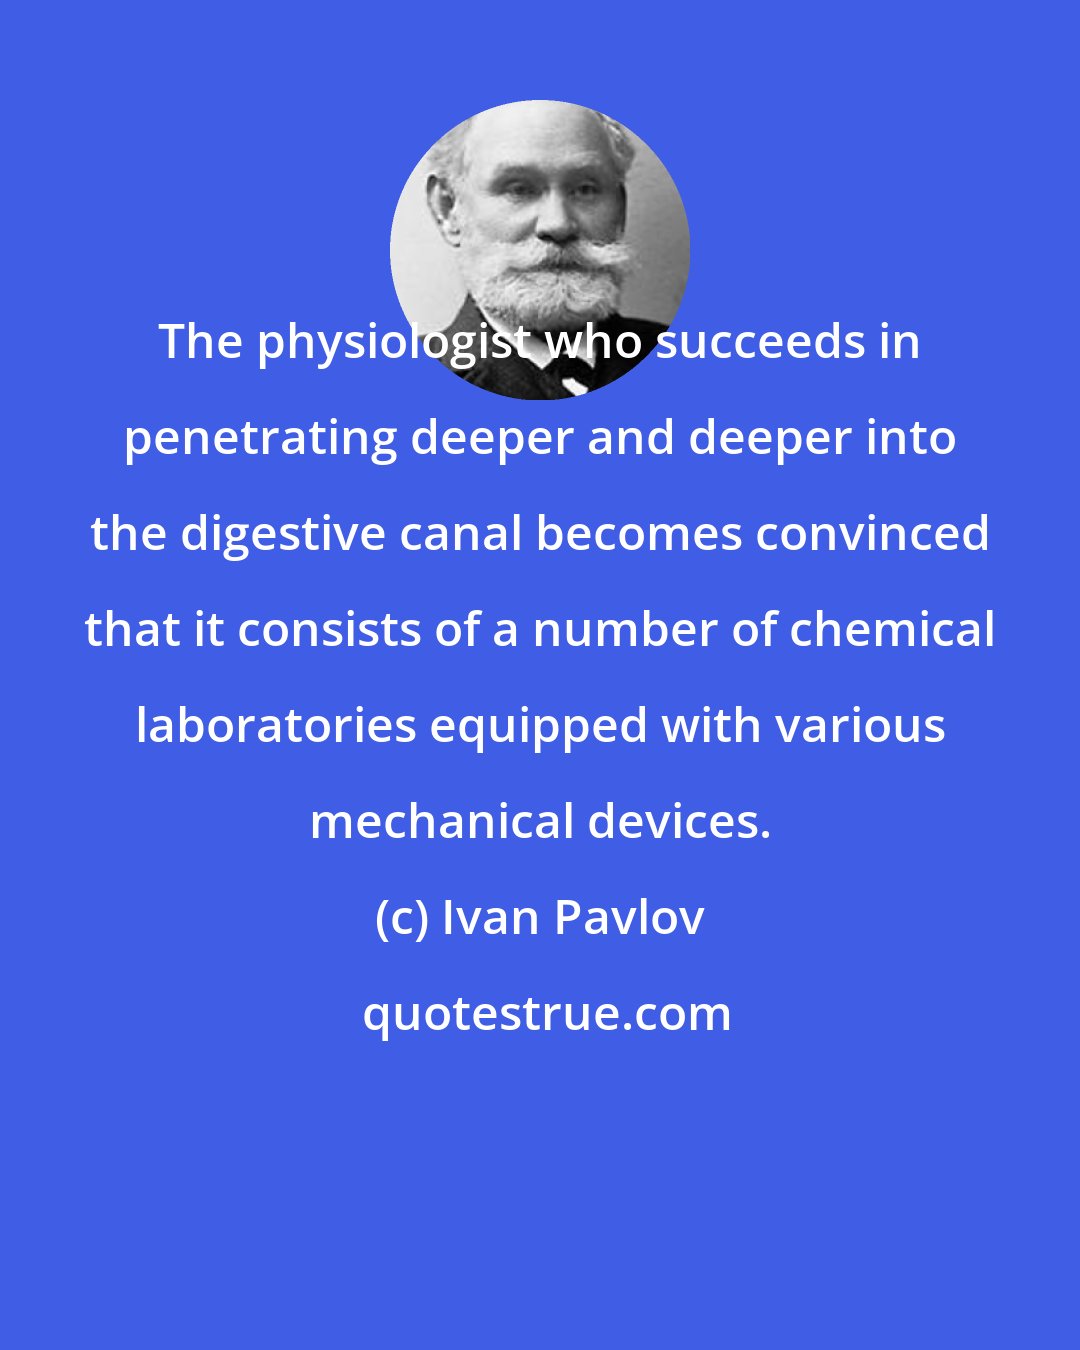 Ivan Pavlov: The physiologist who succeeds in penetrating deeper and deeper into the digestive canal becomes convinced that it consists of a number of chemical laboratories equipped with various mechanical devices.